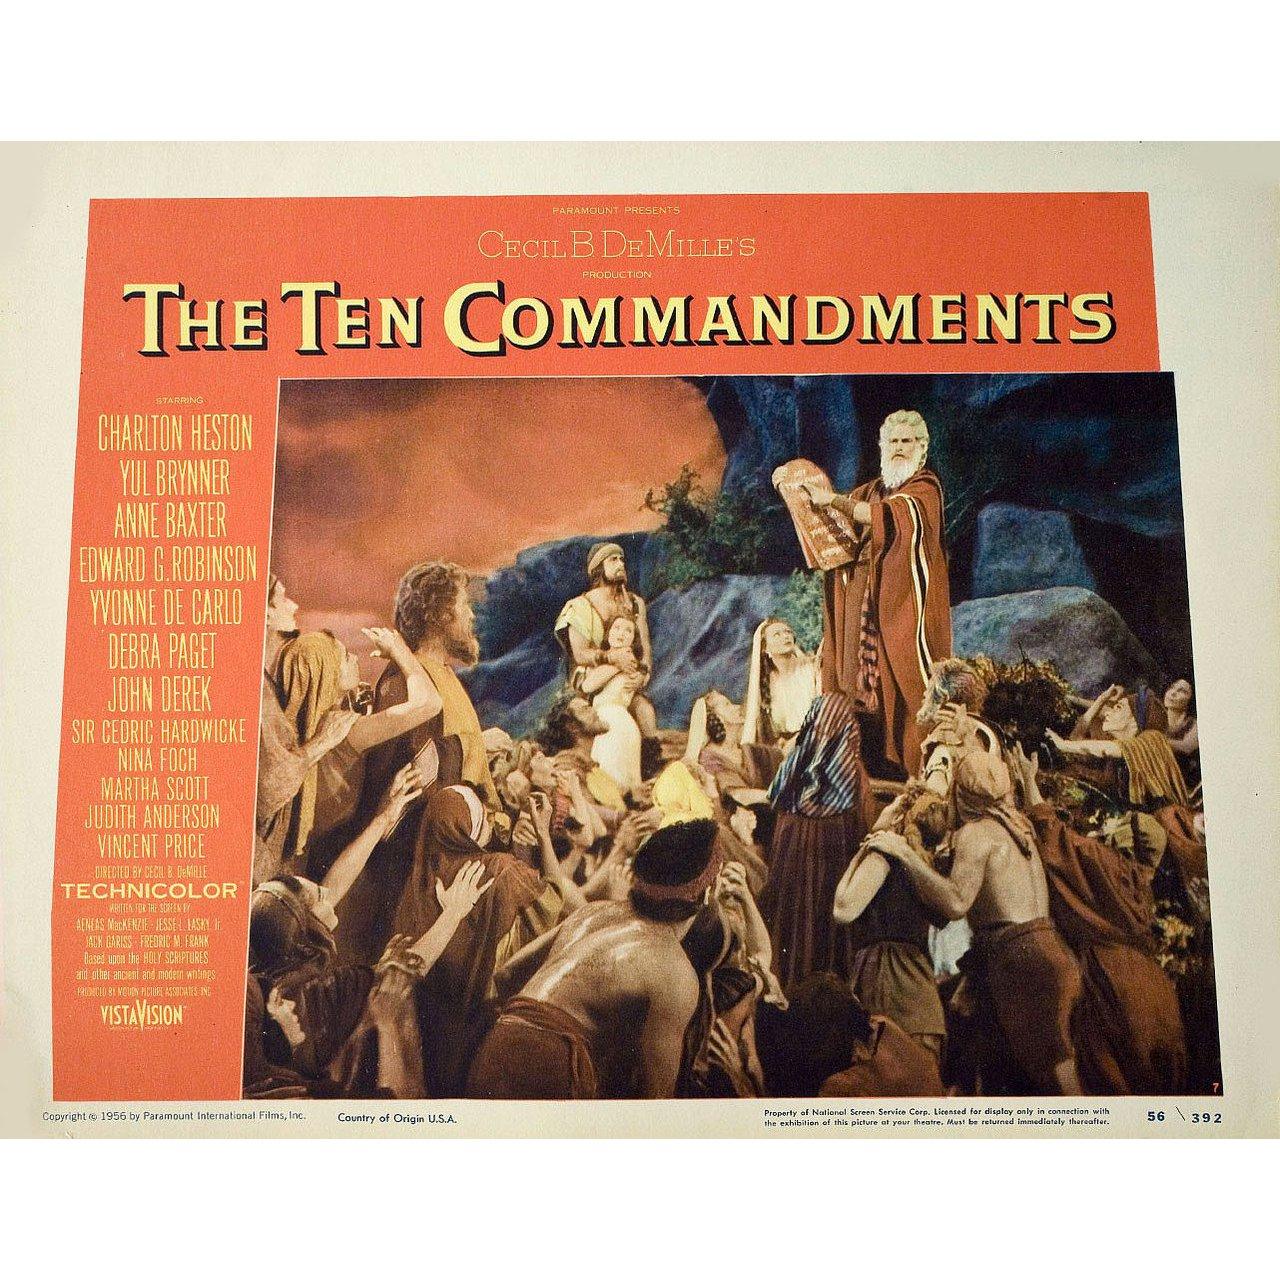 Original 1956 U.S. scene card for the film “The Ten Commandments” directed by Cecil B. DeMille with Charlton Heston / Yul Brynner / Anne Baxter / Edward G. Robinson. Fine condition. Please note: the size is stated in inches and the actual size can